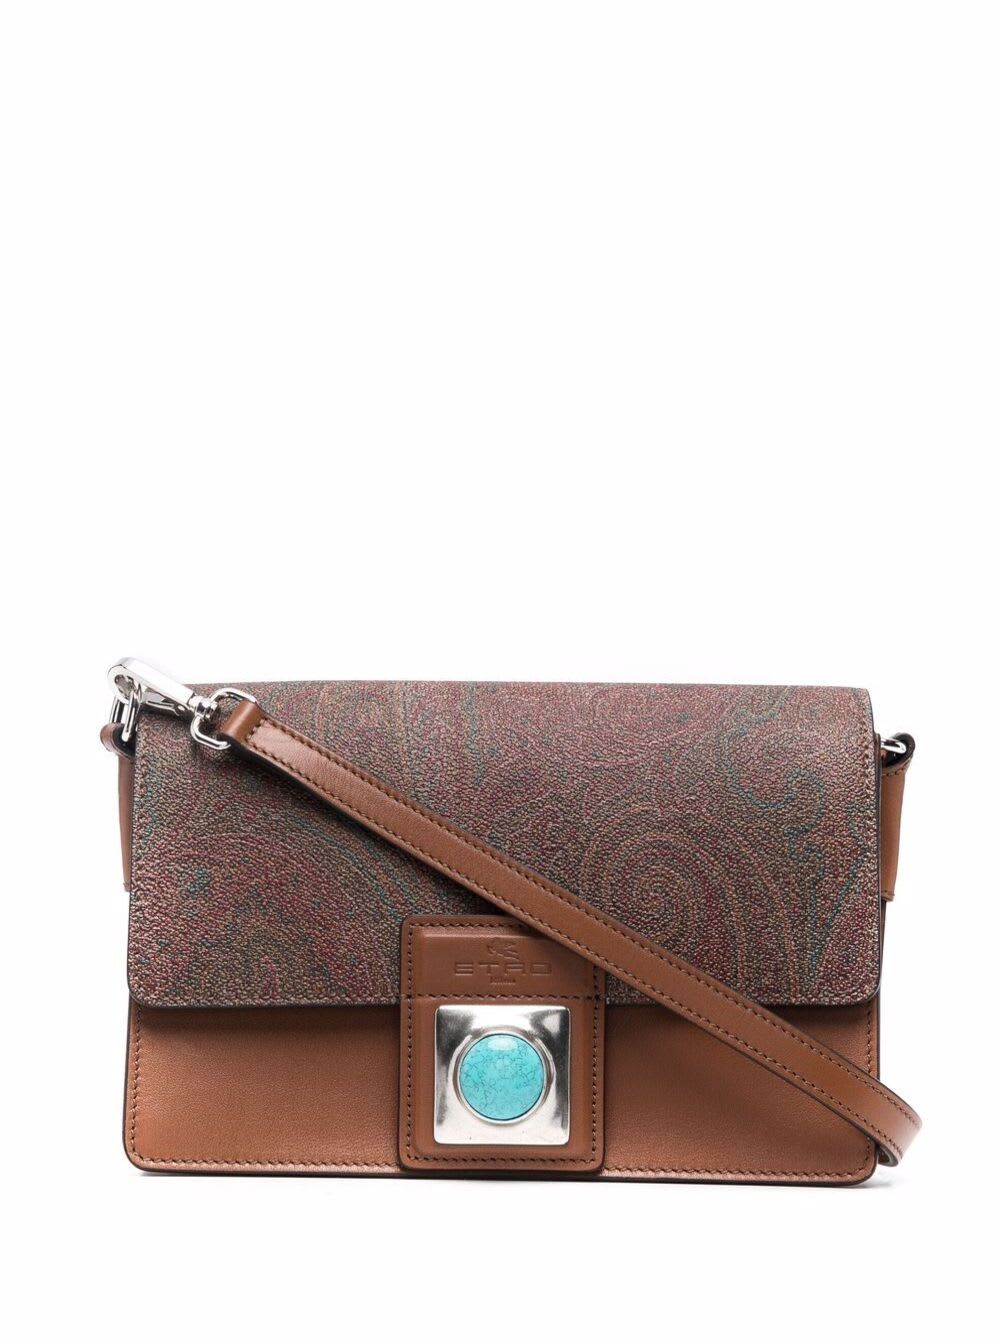 Etro Womans Brown Leather Paisley Printed Shoulder Bag